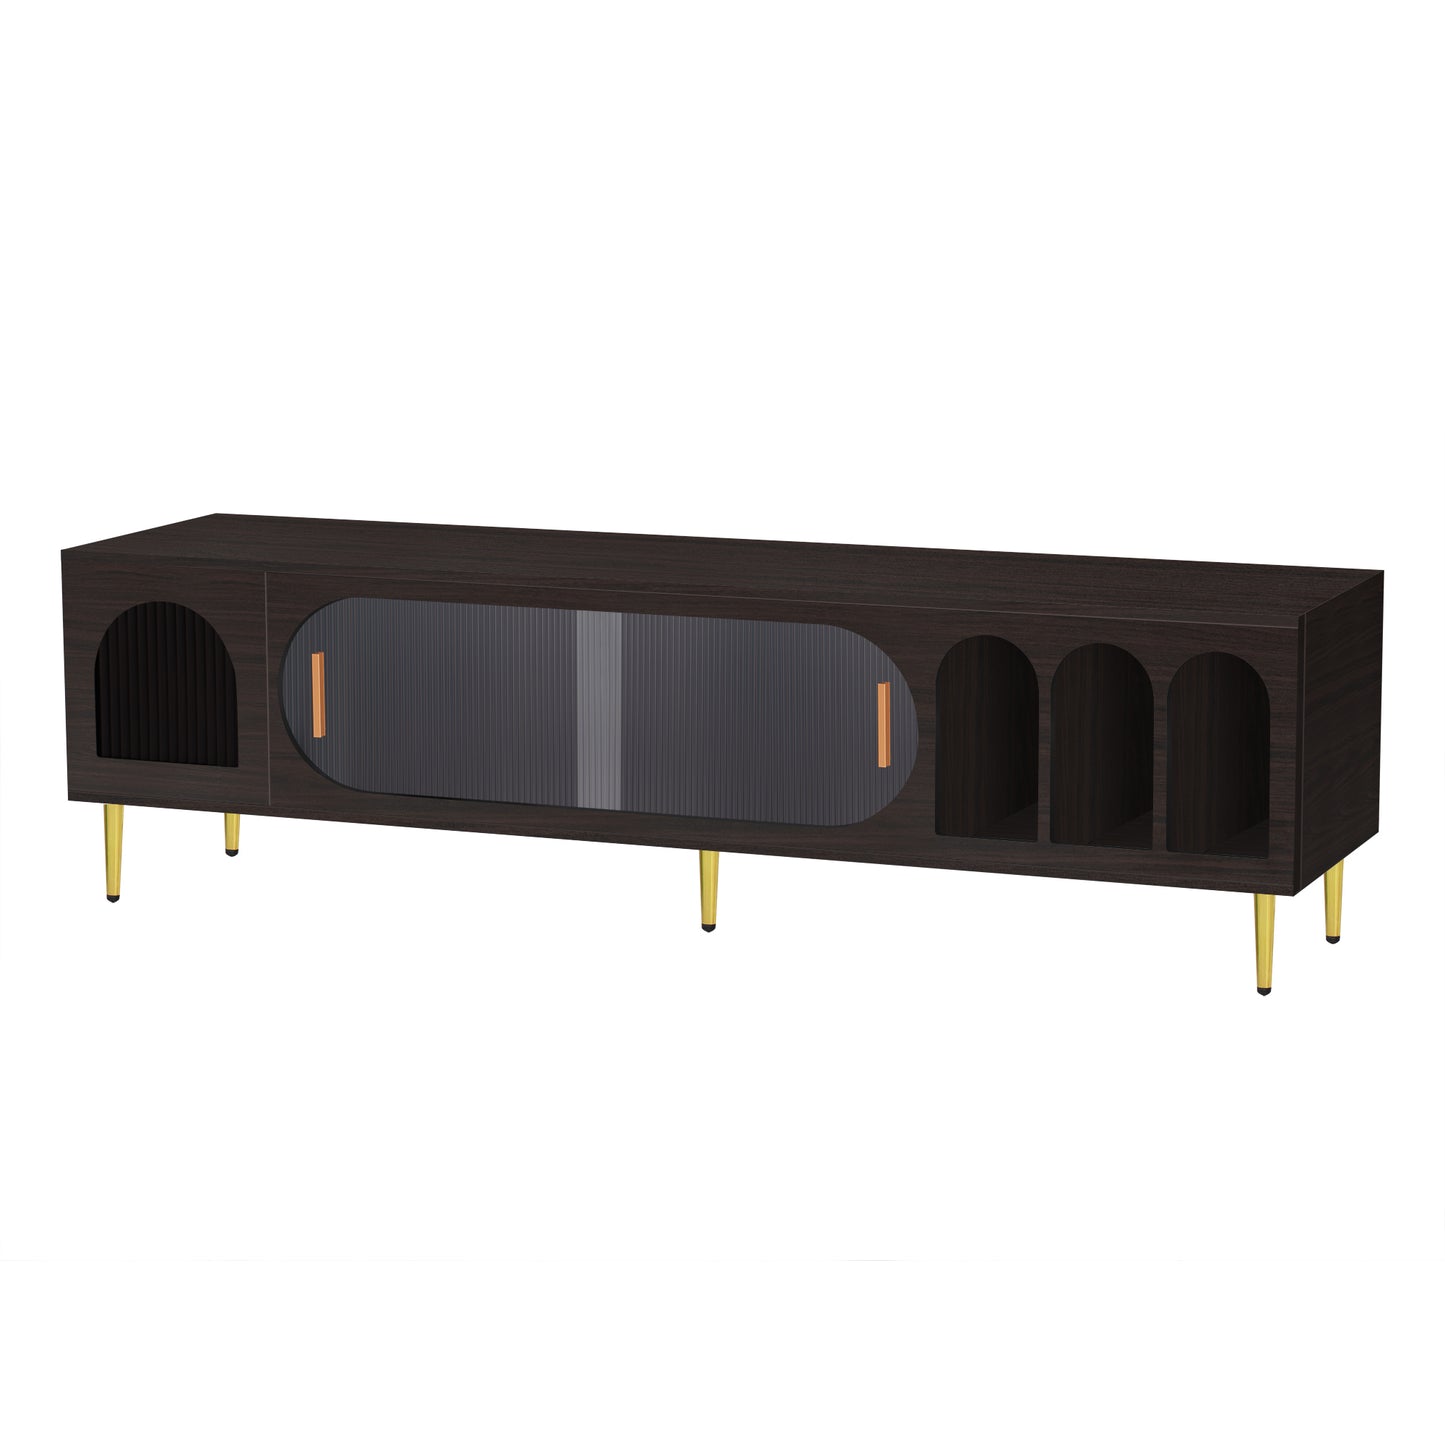 Temur TV Stand for 70+ Inch TV